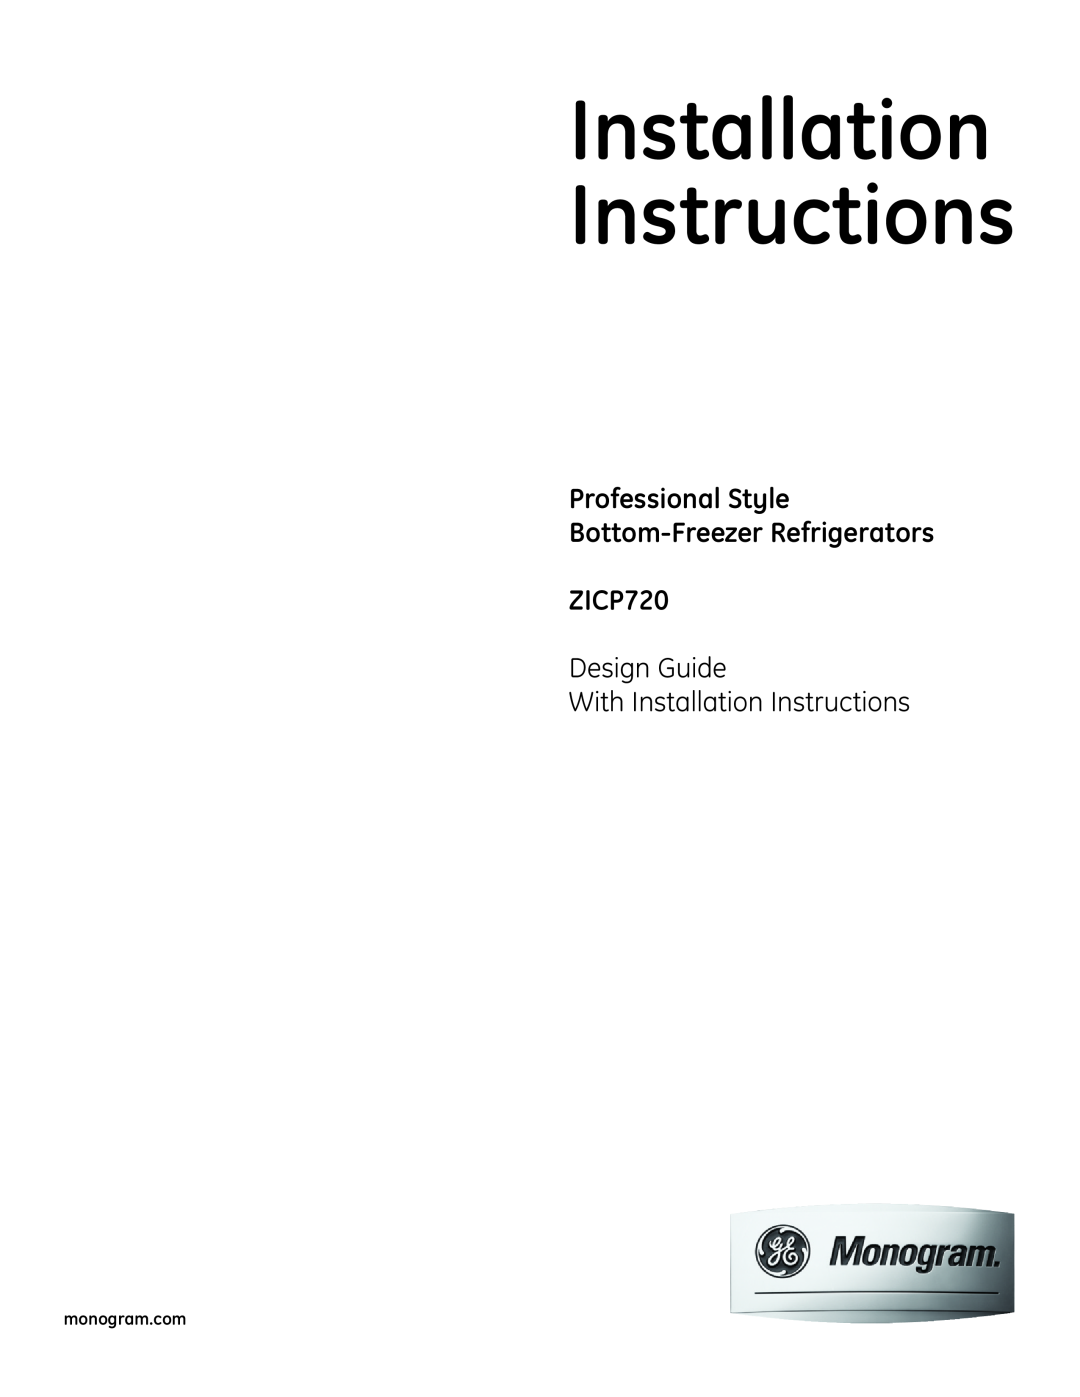 GE ZICP720 installation instructions Design Guide With Installation Instructions, monogram.com 